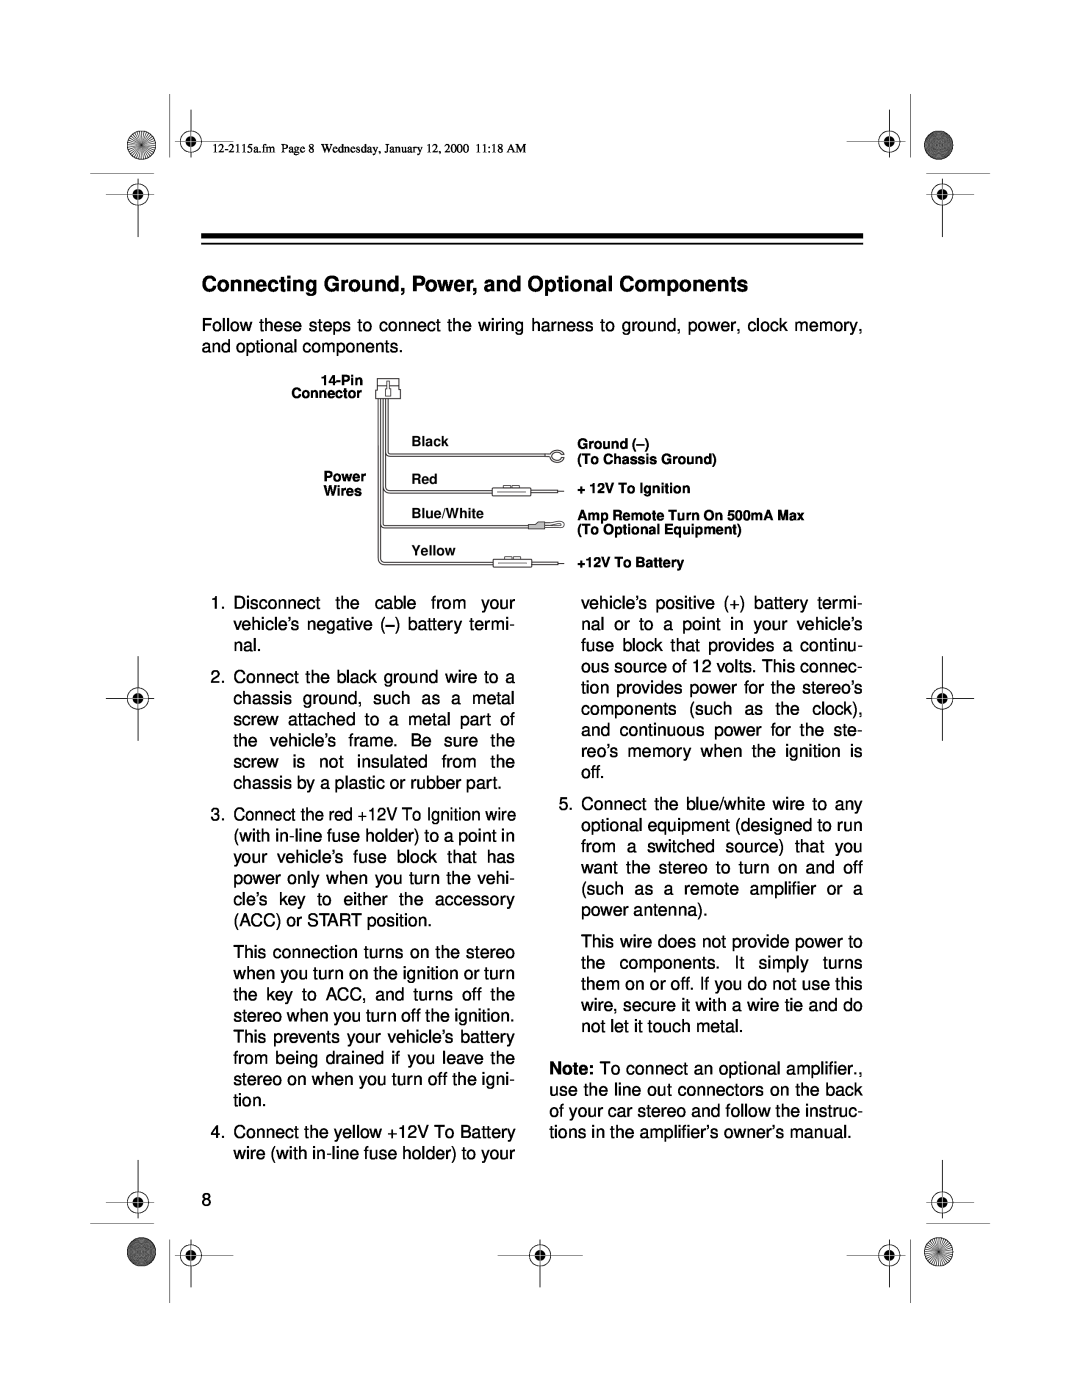 Radio Shack AM/FM Stereo Cassette owner manual Connecting Ground, Power, and Optional Components 